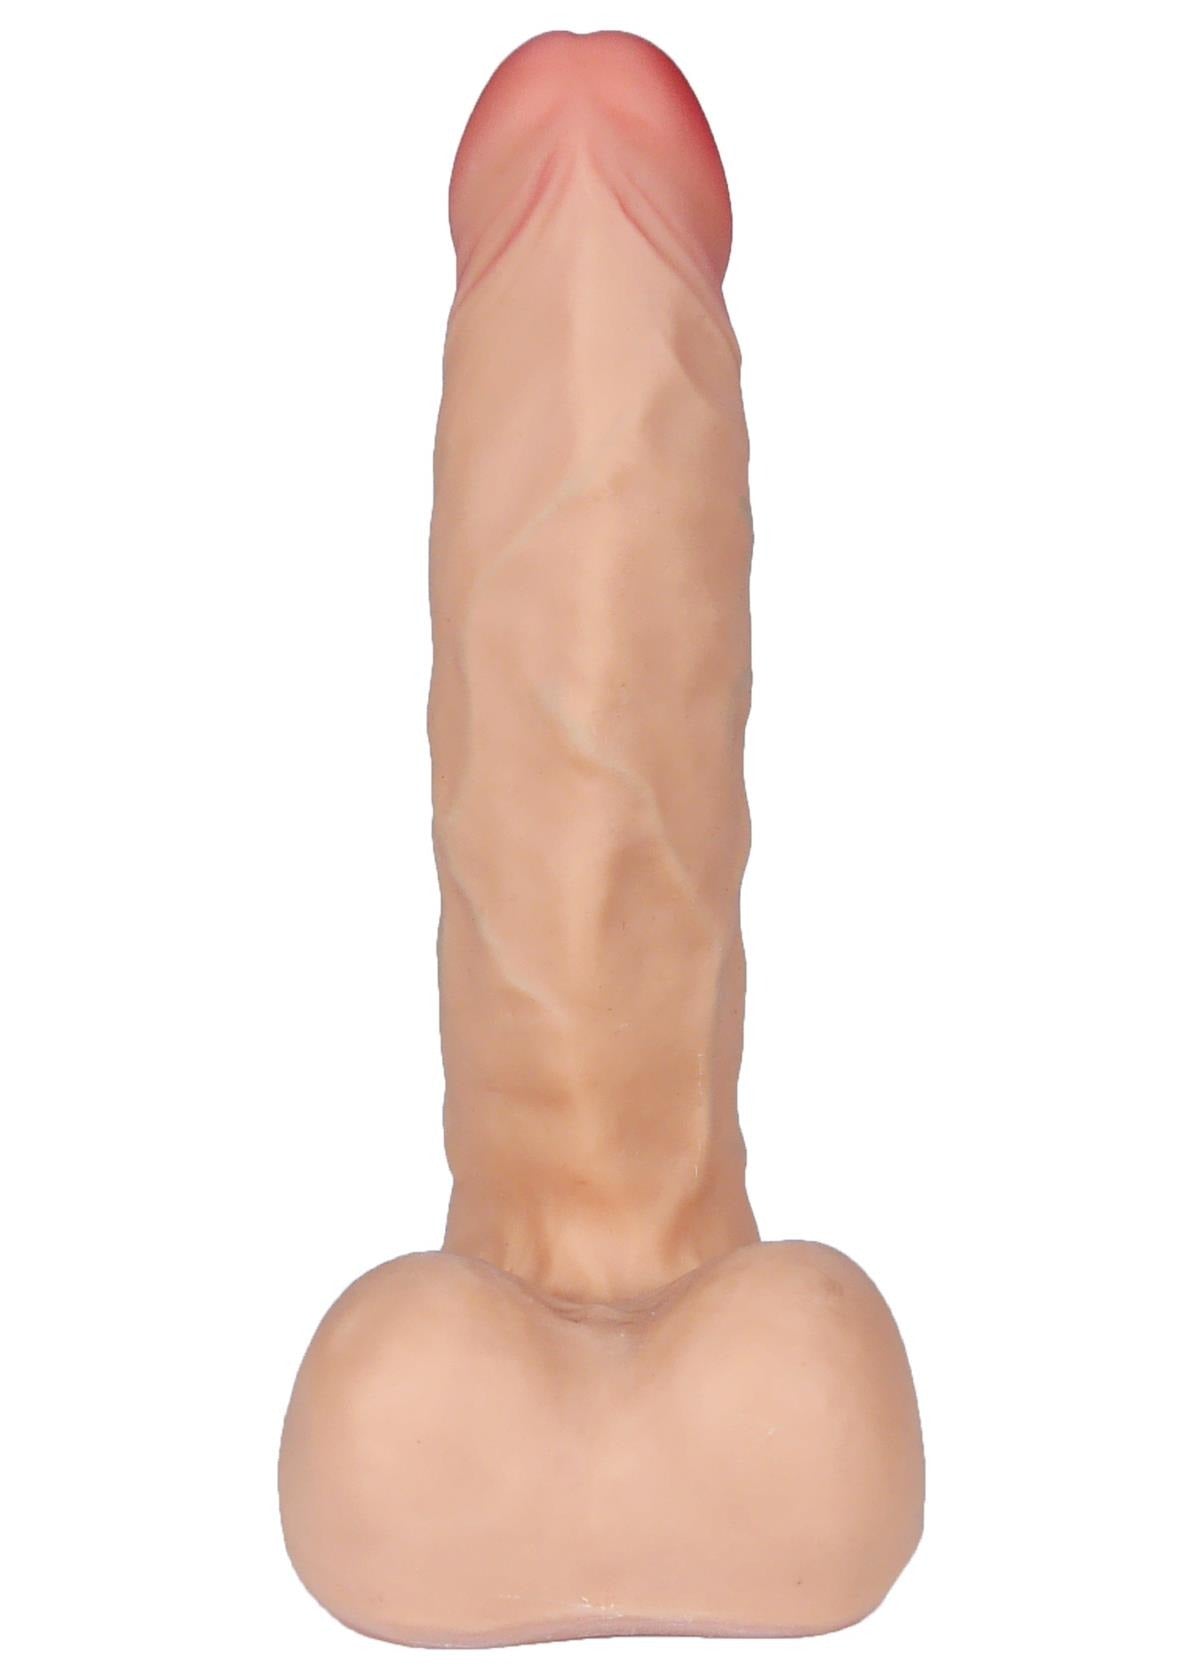 Bossoftoys - 21-00020 - Helios - Loveclonex - Ultra Realistic Dildo - Cyber skin feels like real - Better then Silicone - 4,8 cm thick - Suction Cup - Flesh - 8 inch / 23 cm